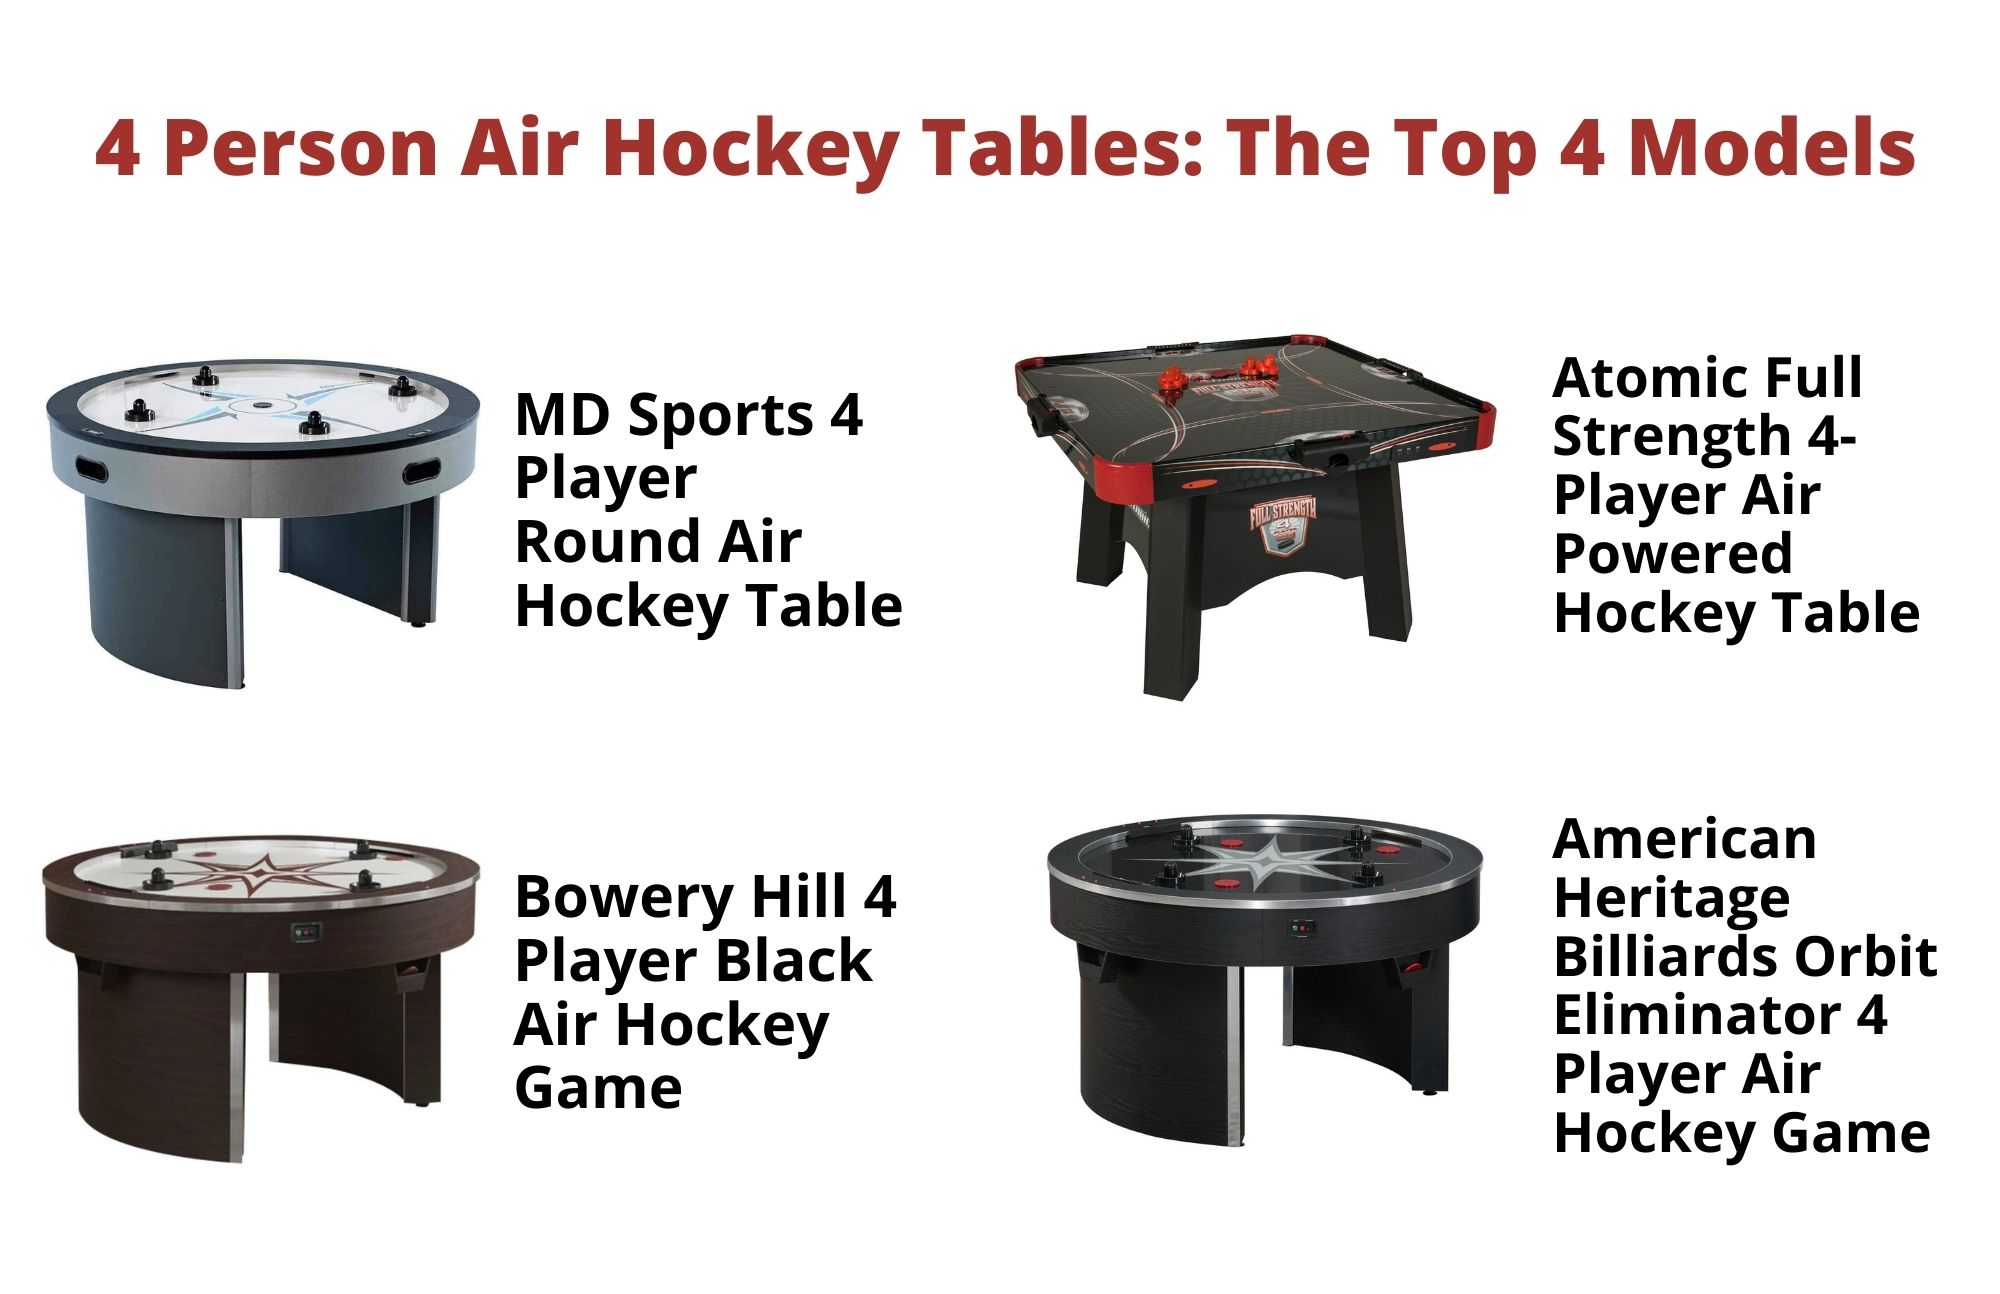 Different versions of 4 Person Air Hockey Tables